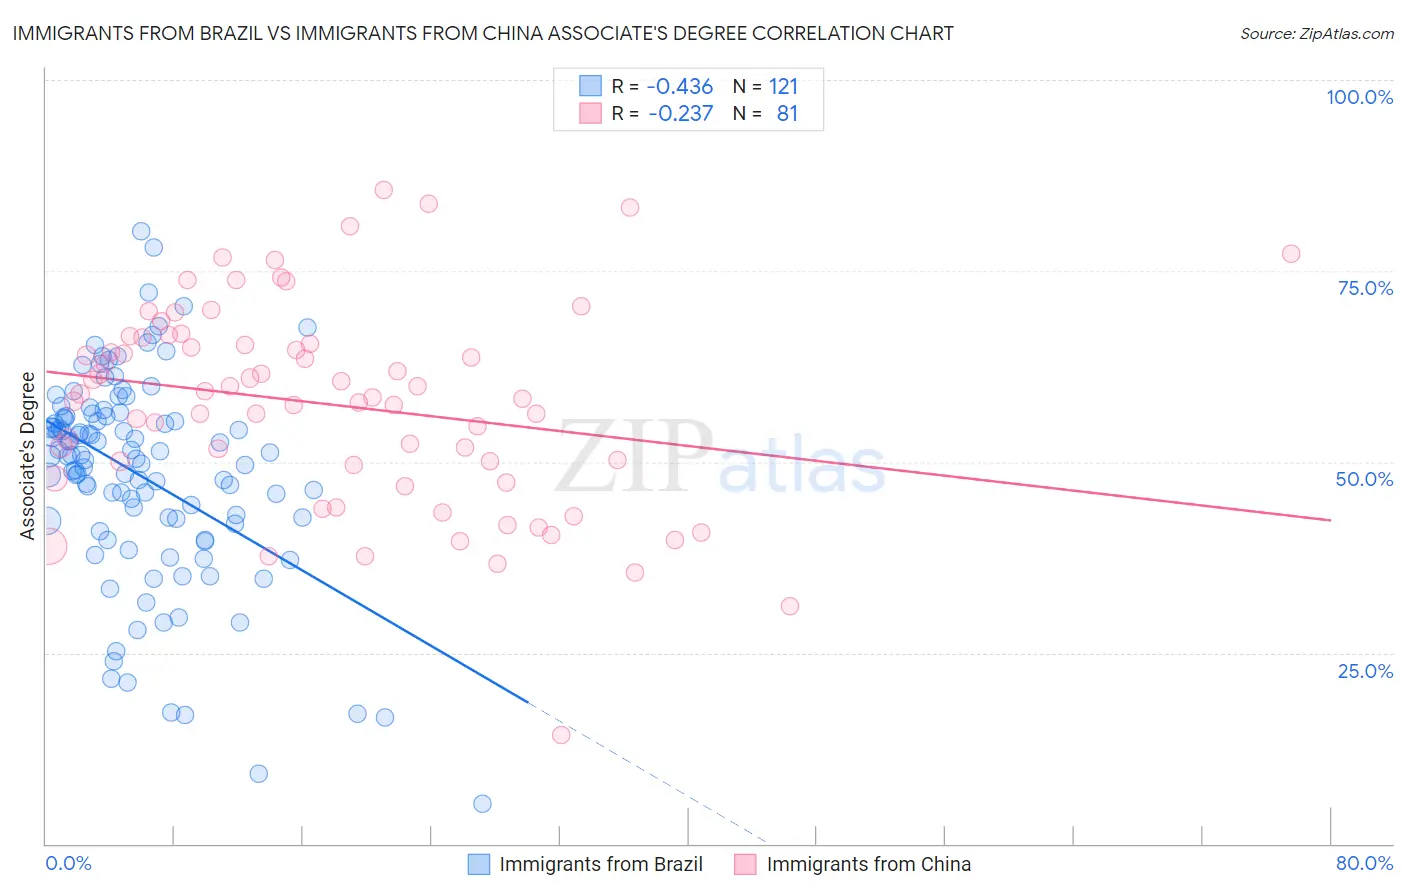 Immigrants from Brazil vs Immigrants from China Associate's Degree